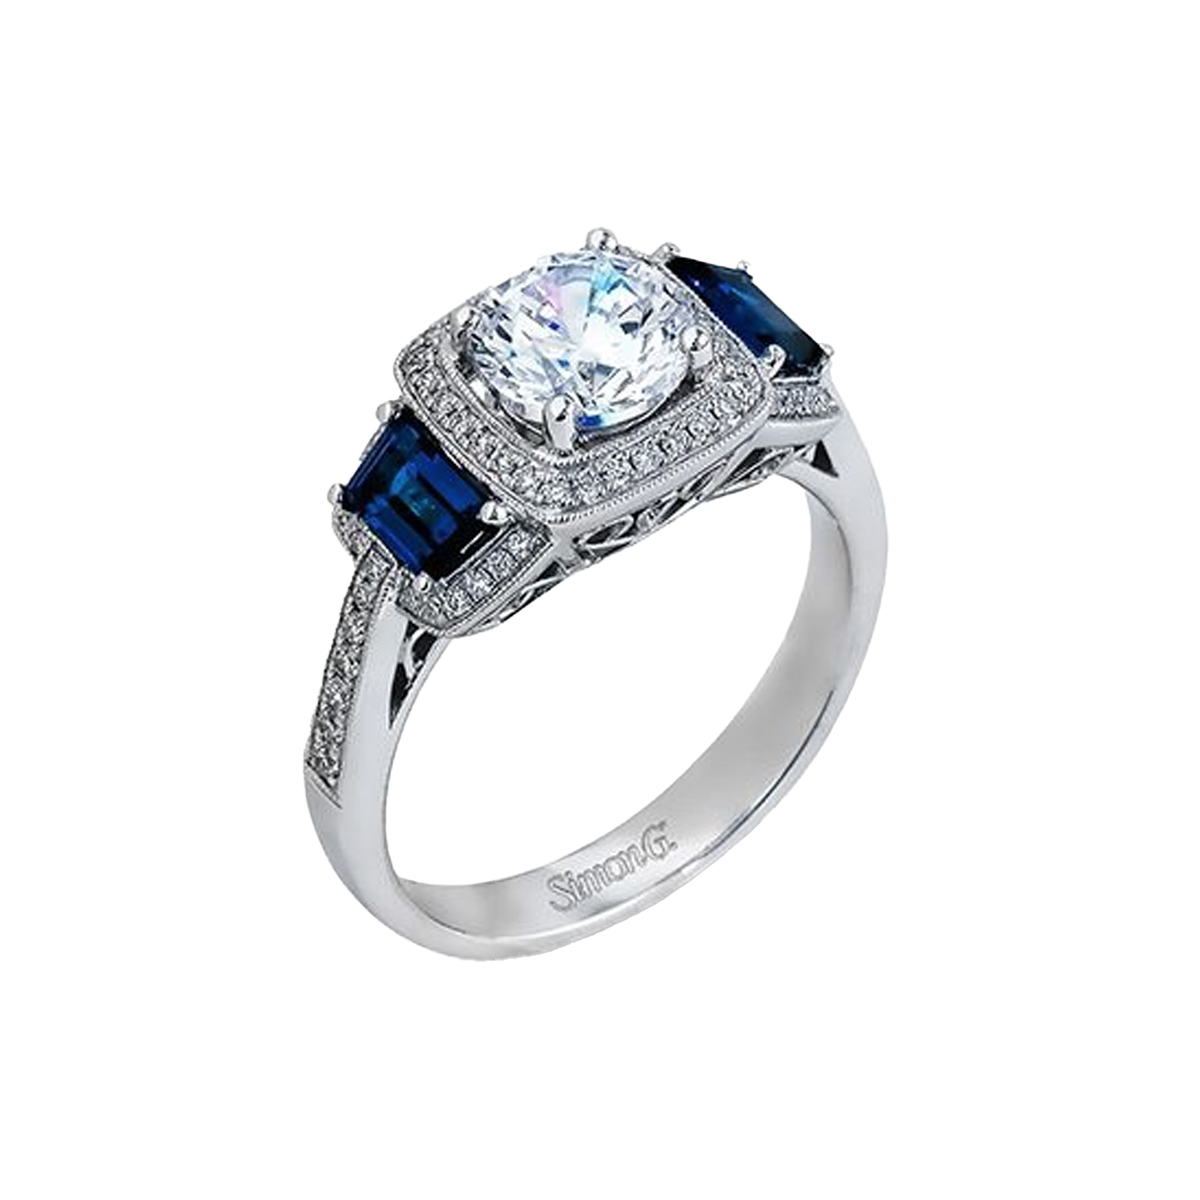 18K White Gold Diamond and Trapezoid Blue Sapphire Engagement Ring Semi-Mounting